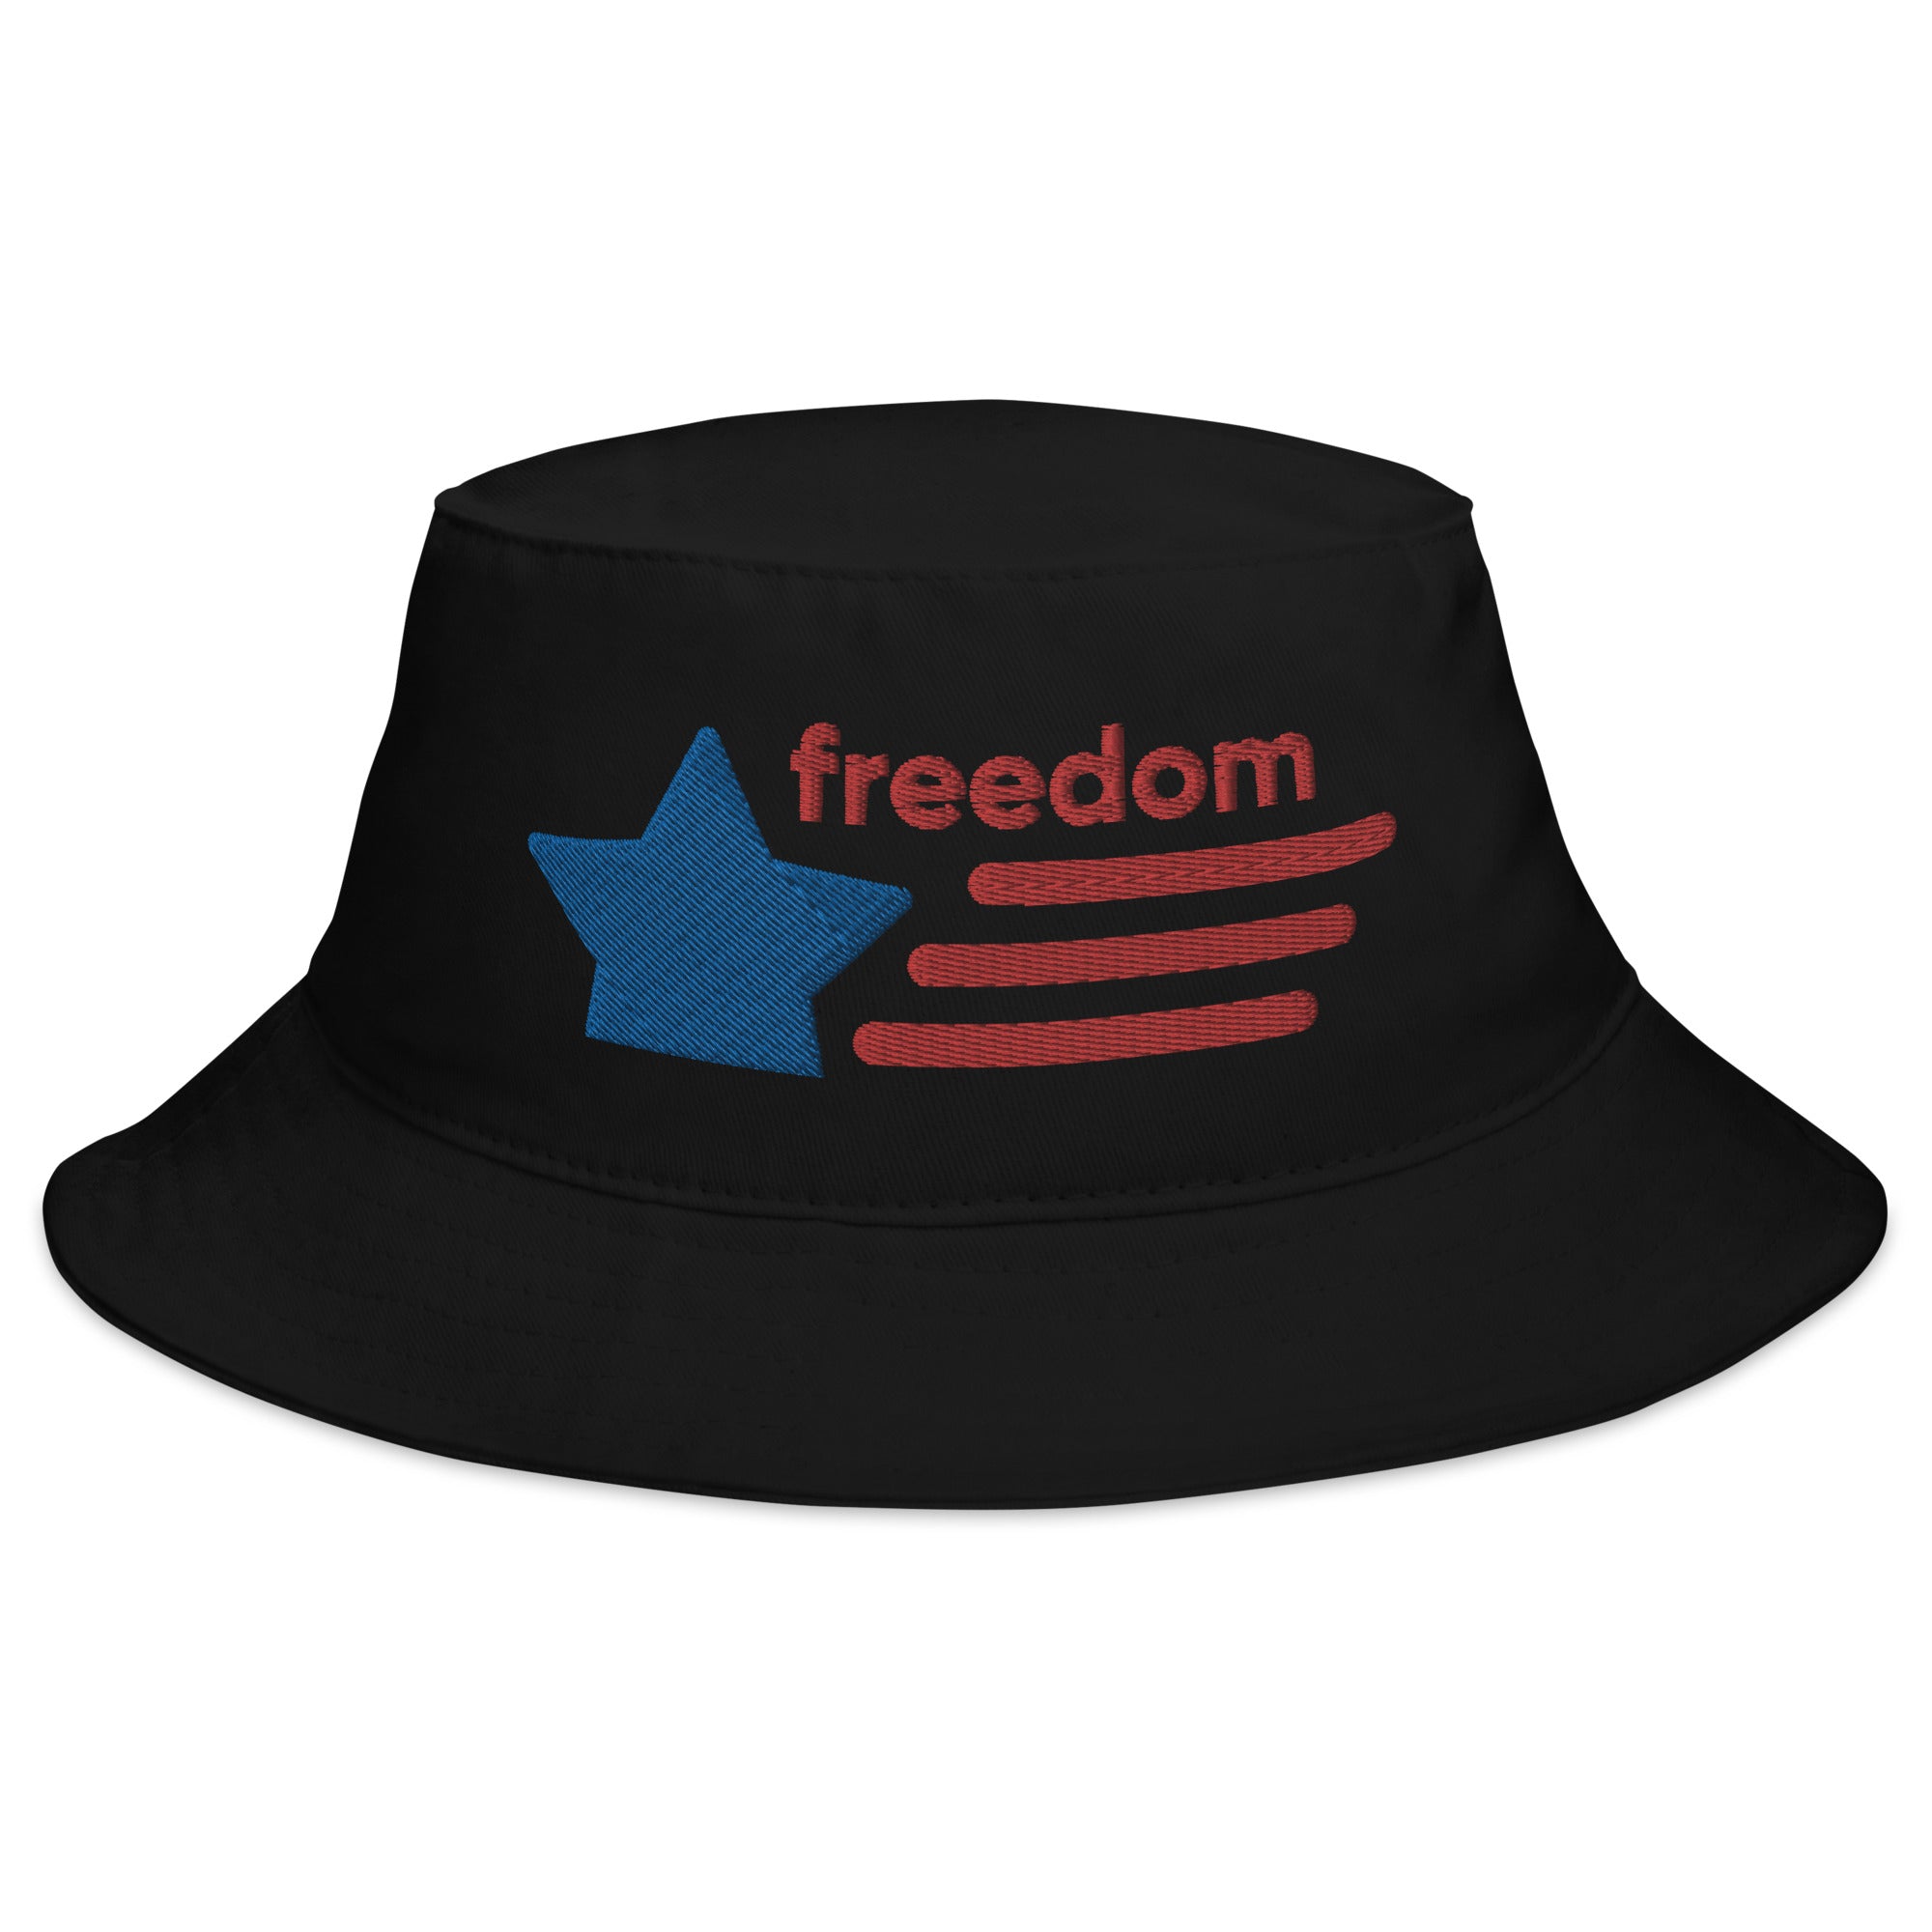 Bucket Hat, Customized Hat, Freedom Hat, Embroidered Hat